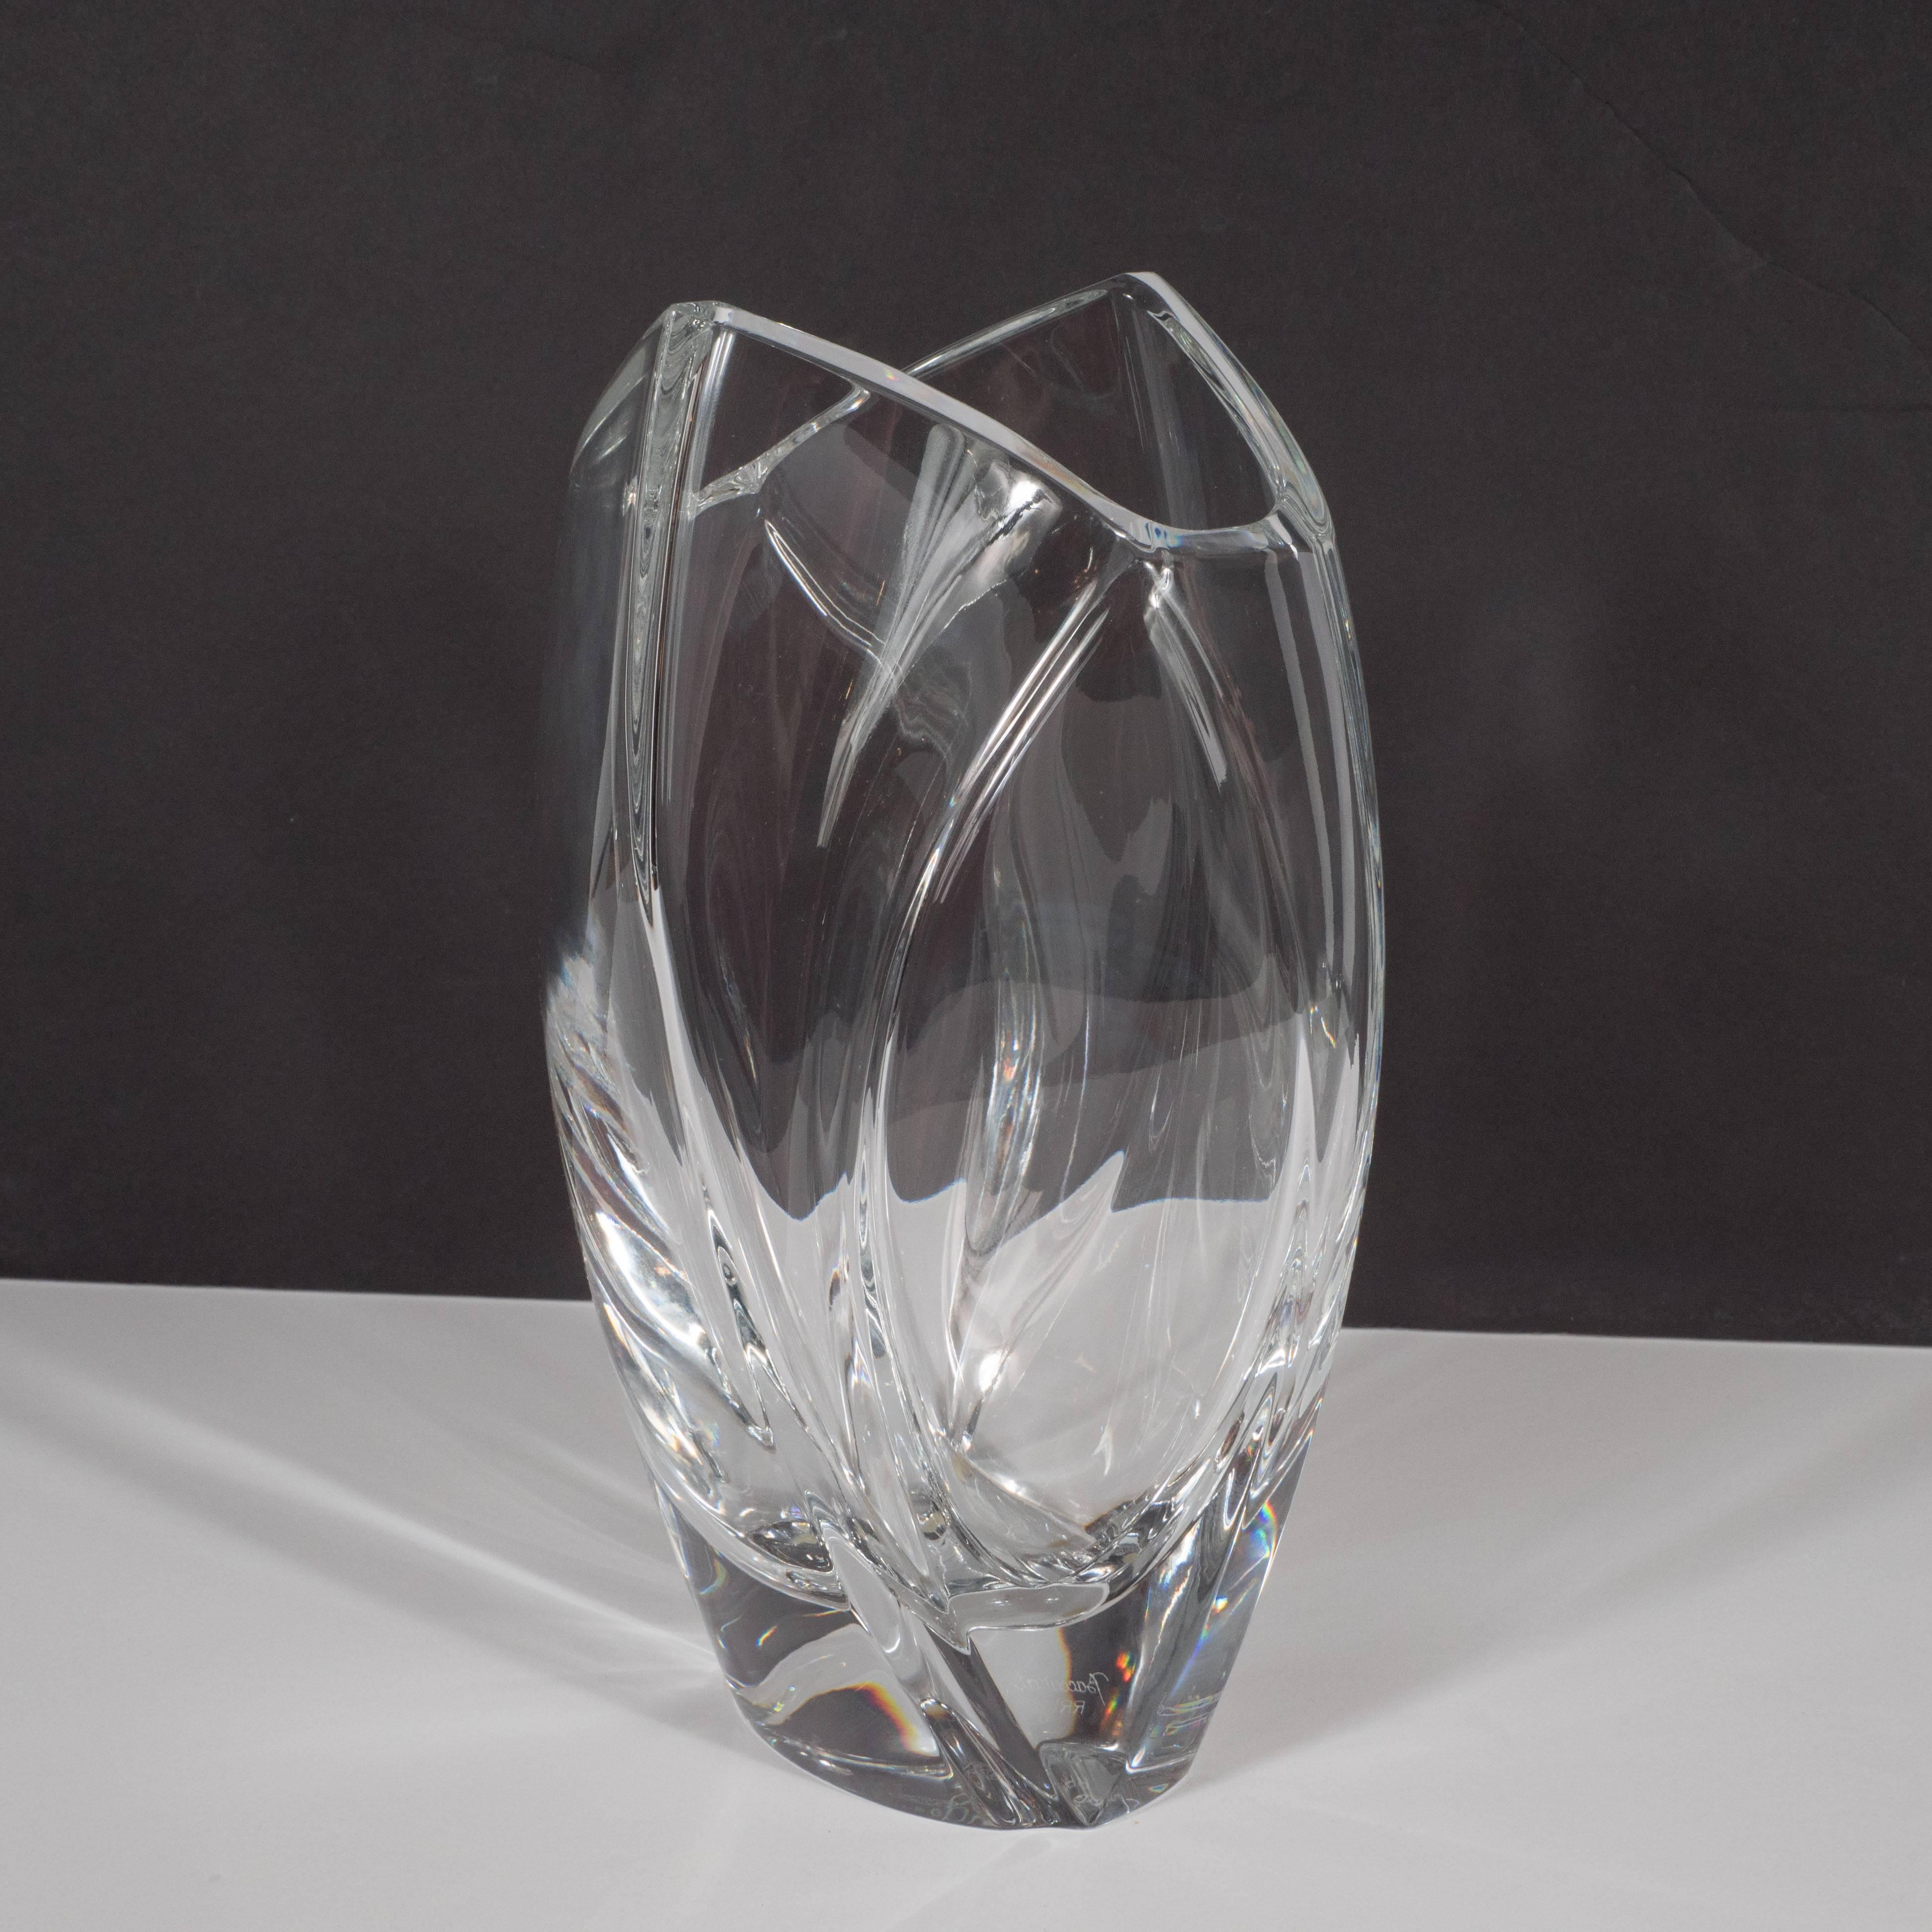 Late 20th Century Mid-Century Modern Hexagonal Translucent Glass Vase by Baccarat of France